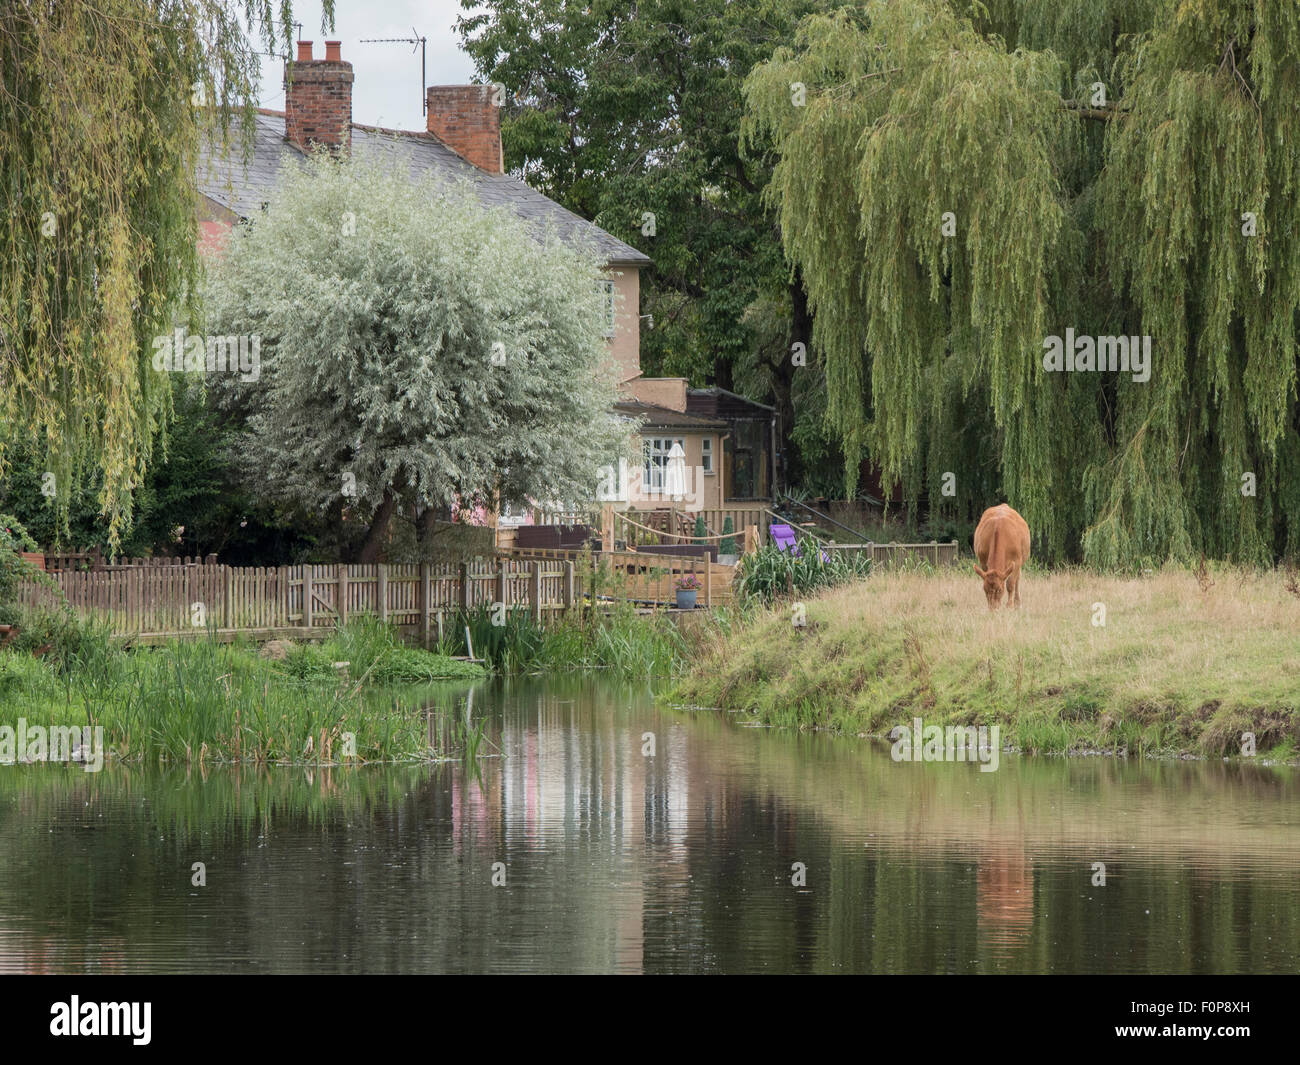 Country hideaway: houses nestling amongst trees in a sleepy English rural setting. Stock Photo